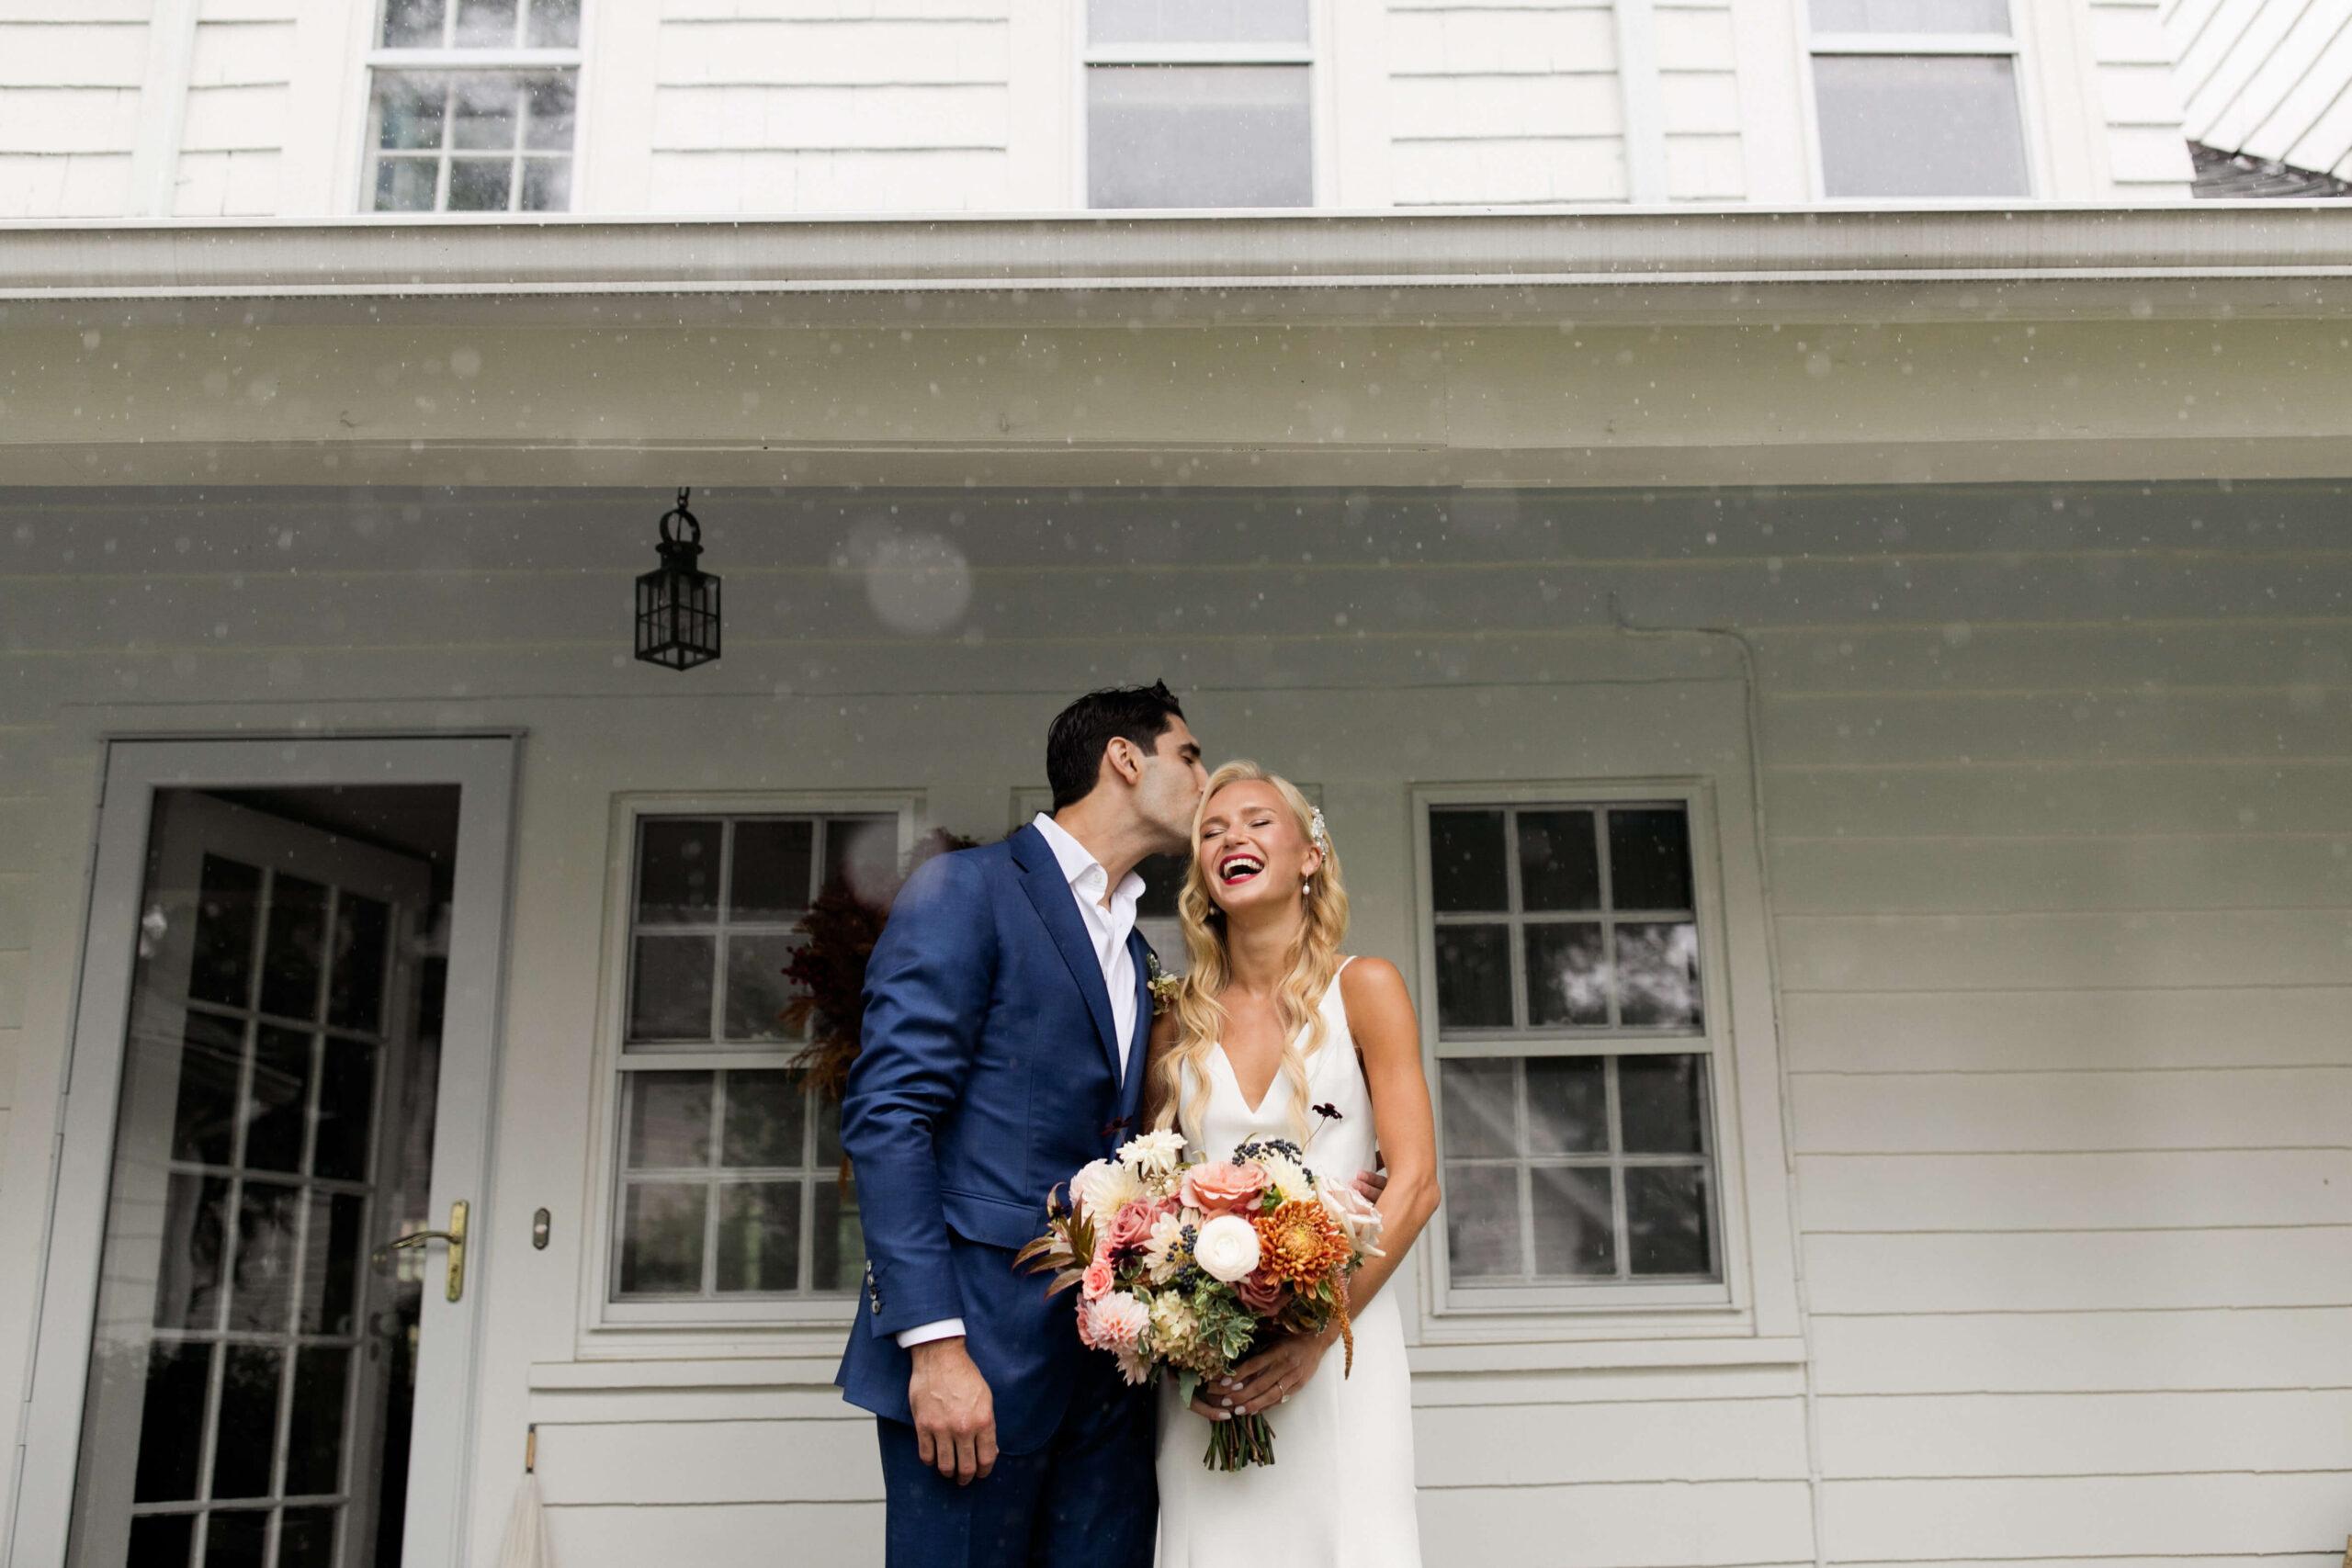 Bride and groom in front of house during their rainy wedding day.